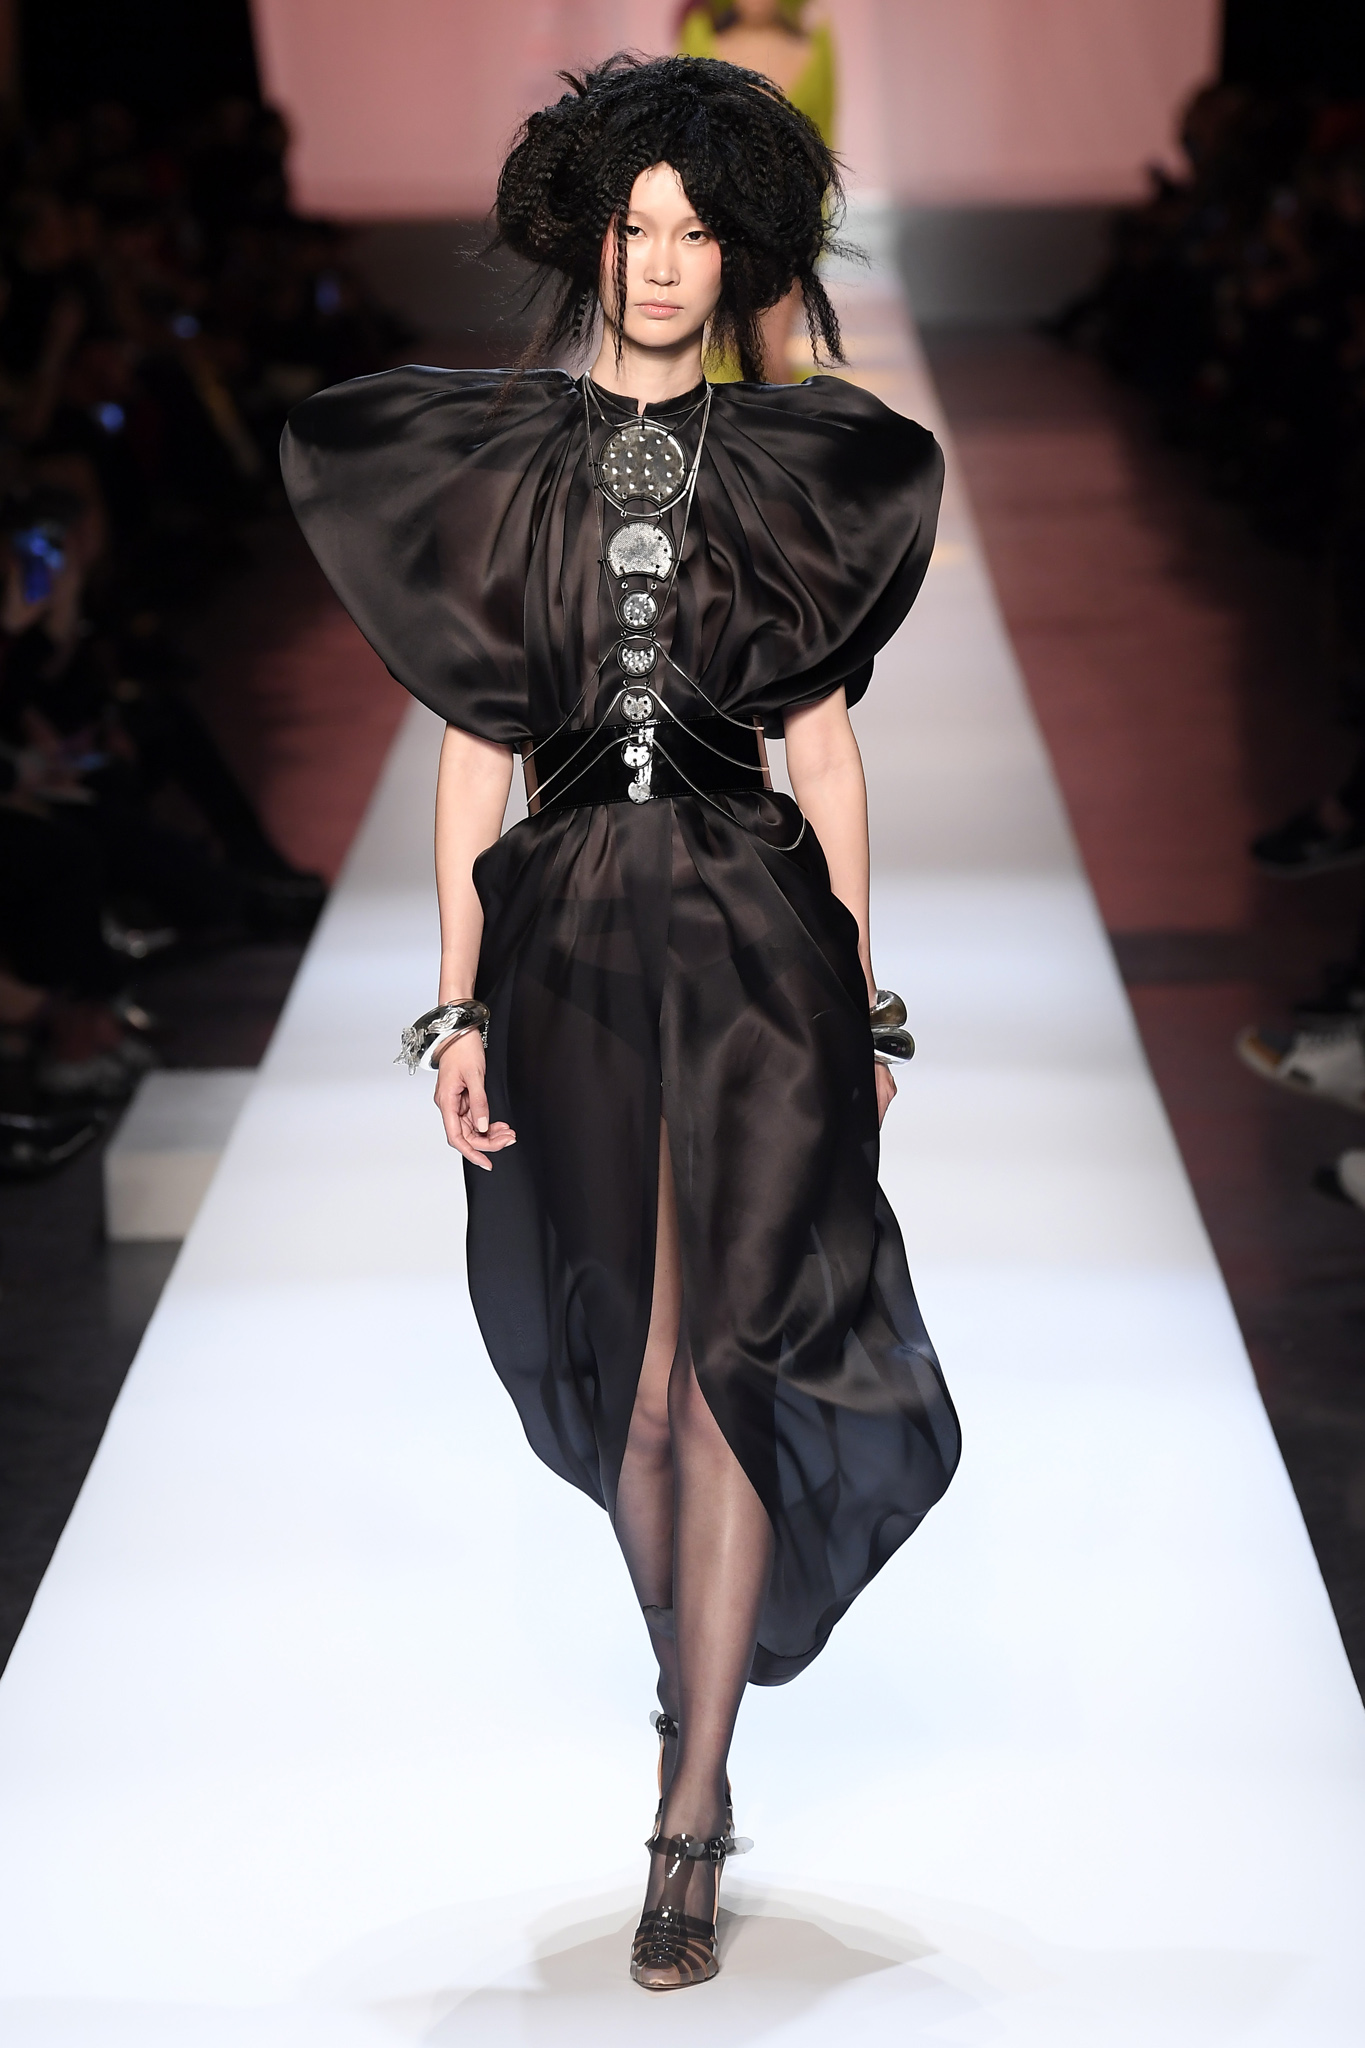 Jean Paul Gaultier Spring Summer 2019 Haute Couture Fashion Show